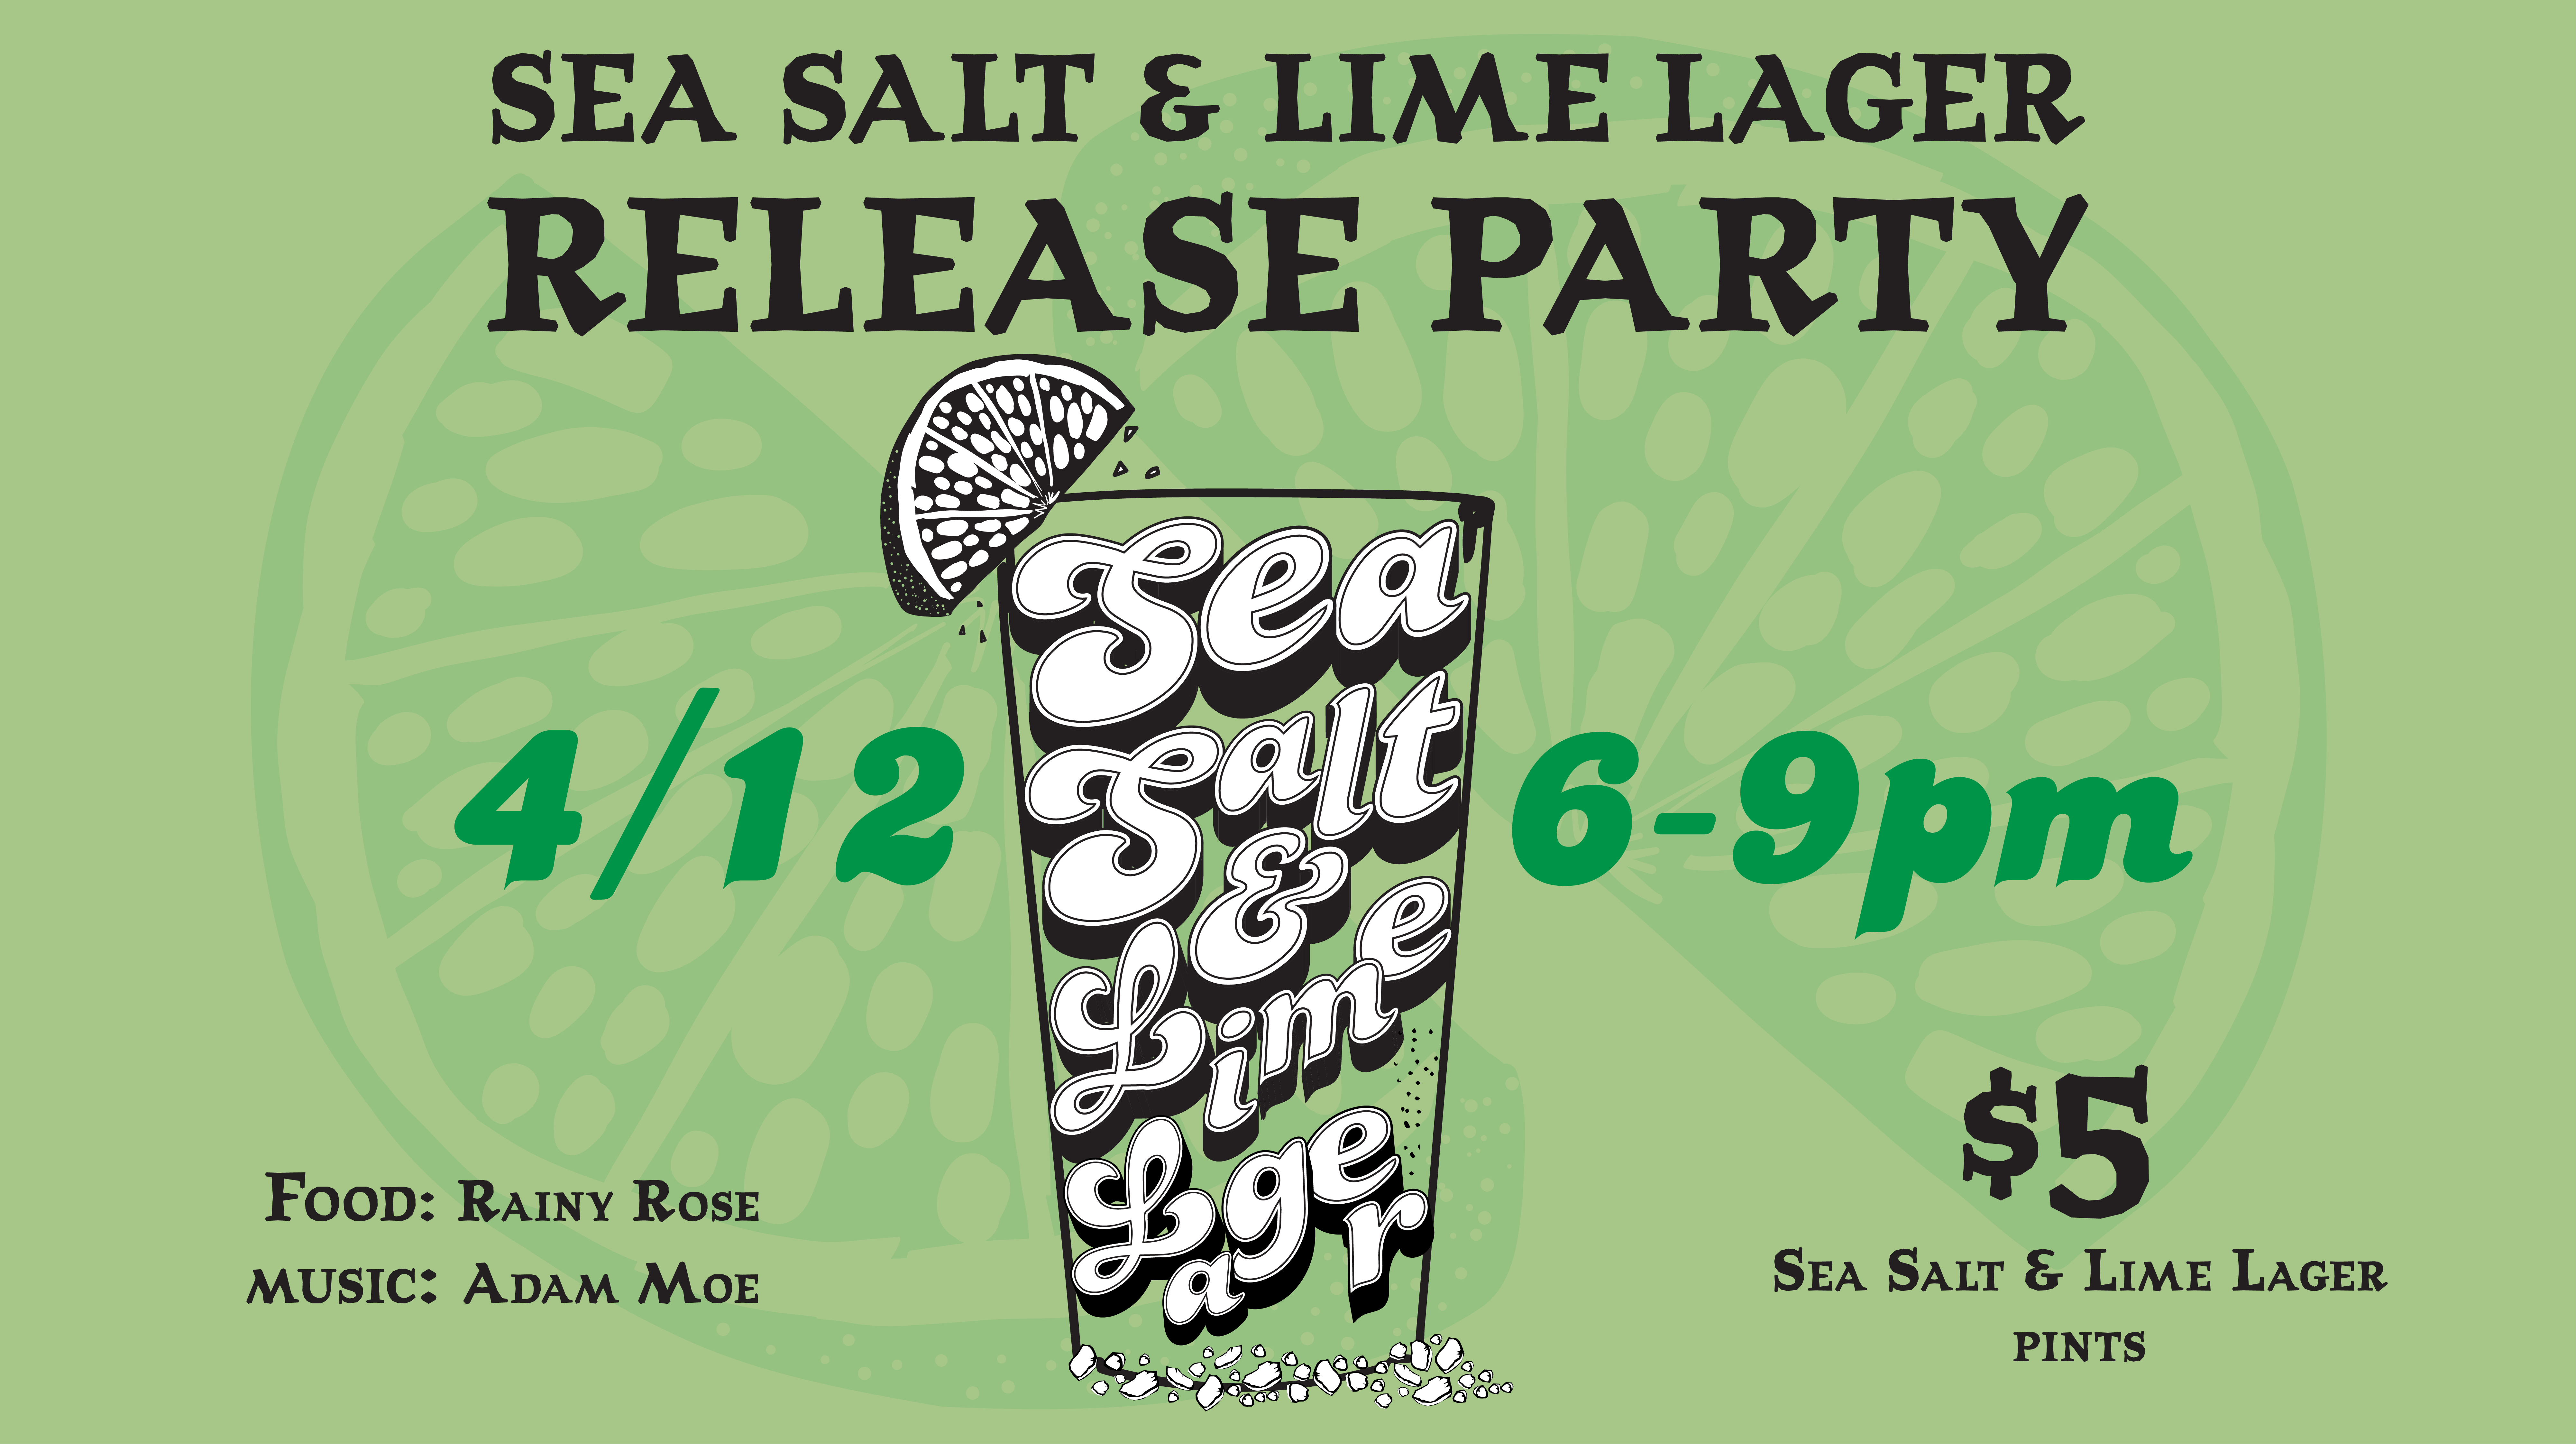 Sea Salt & Lime Lager beer release party on Friday, April 12th from 6-9pm with food from Rainy Rose, music from Adam Moe, and $5 pints of Sea Salt & Lime Lager